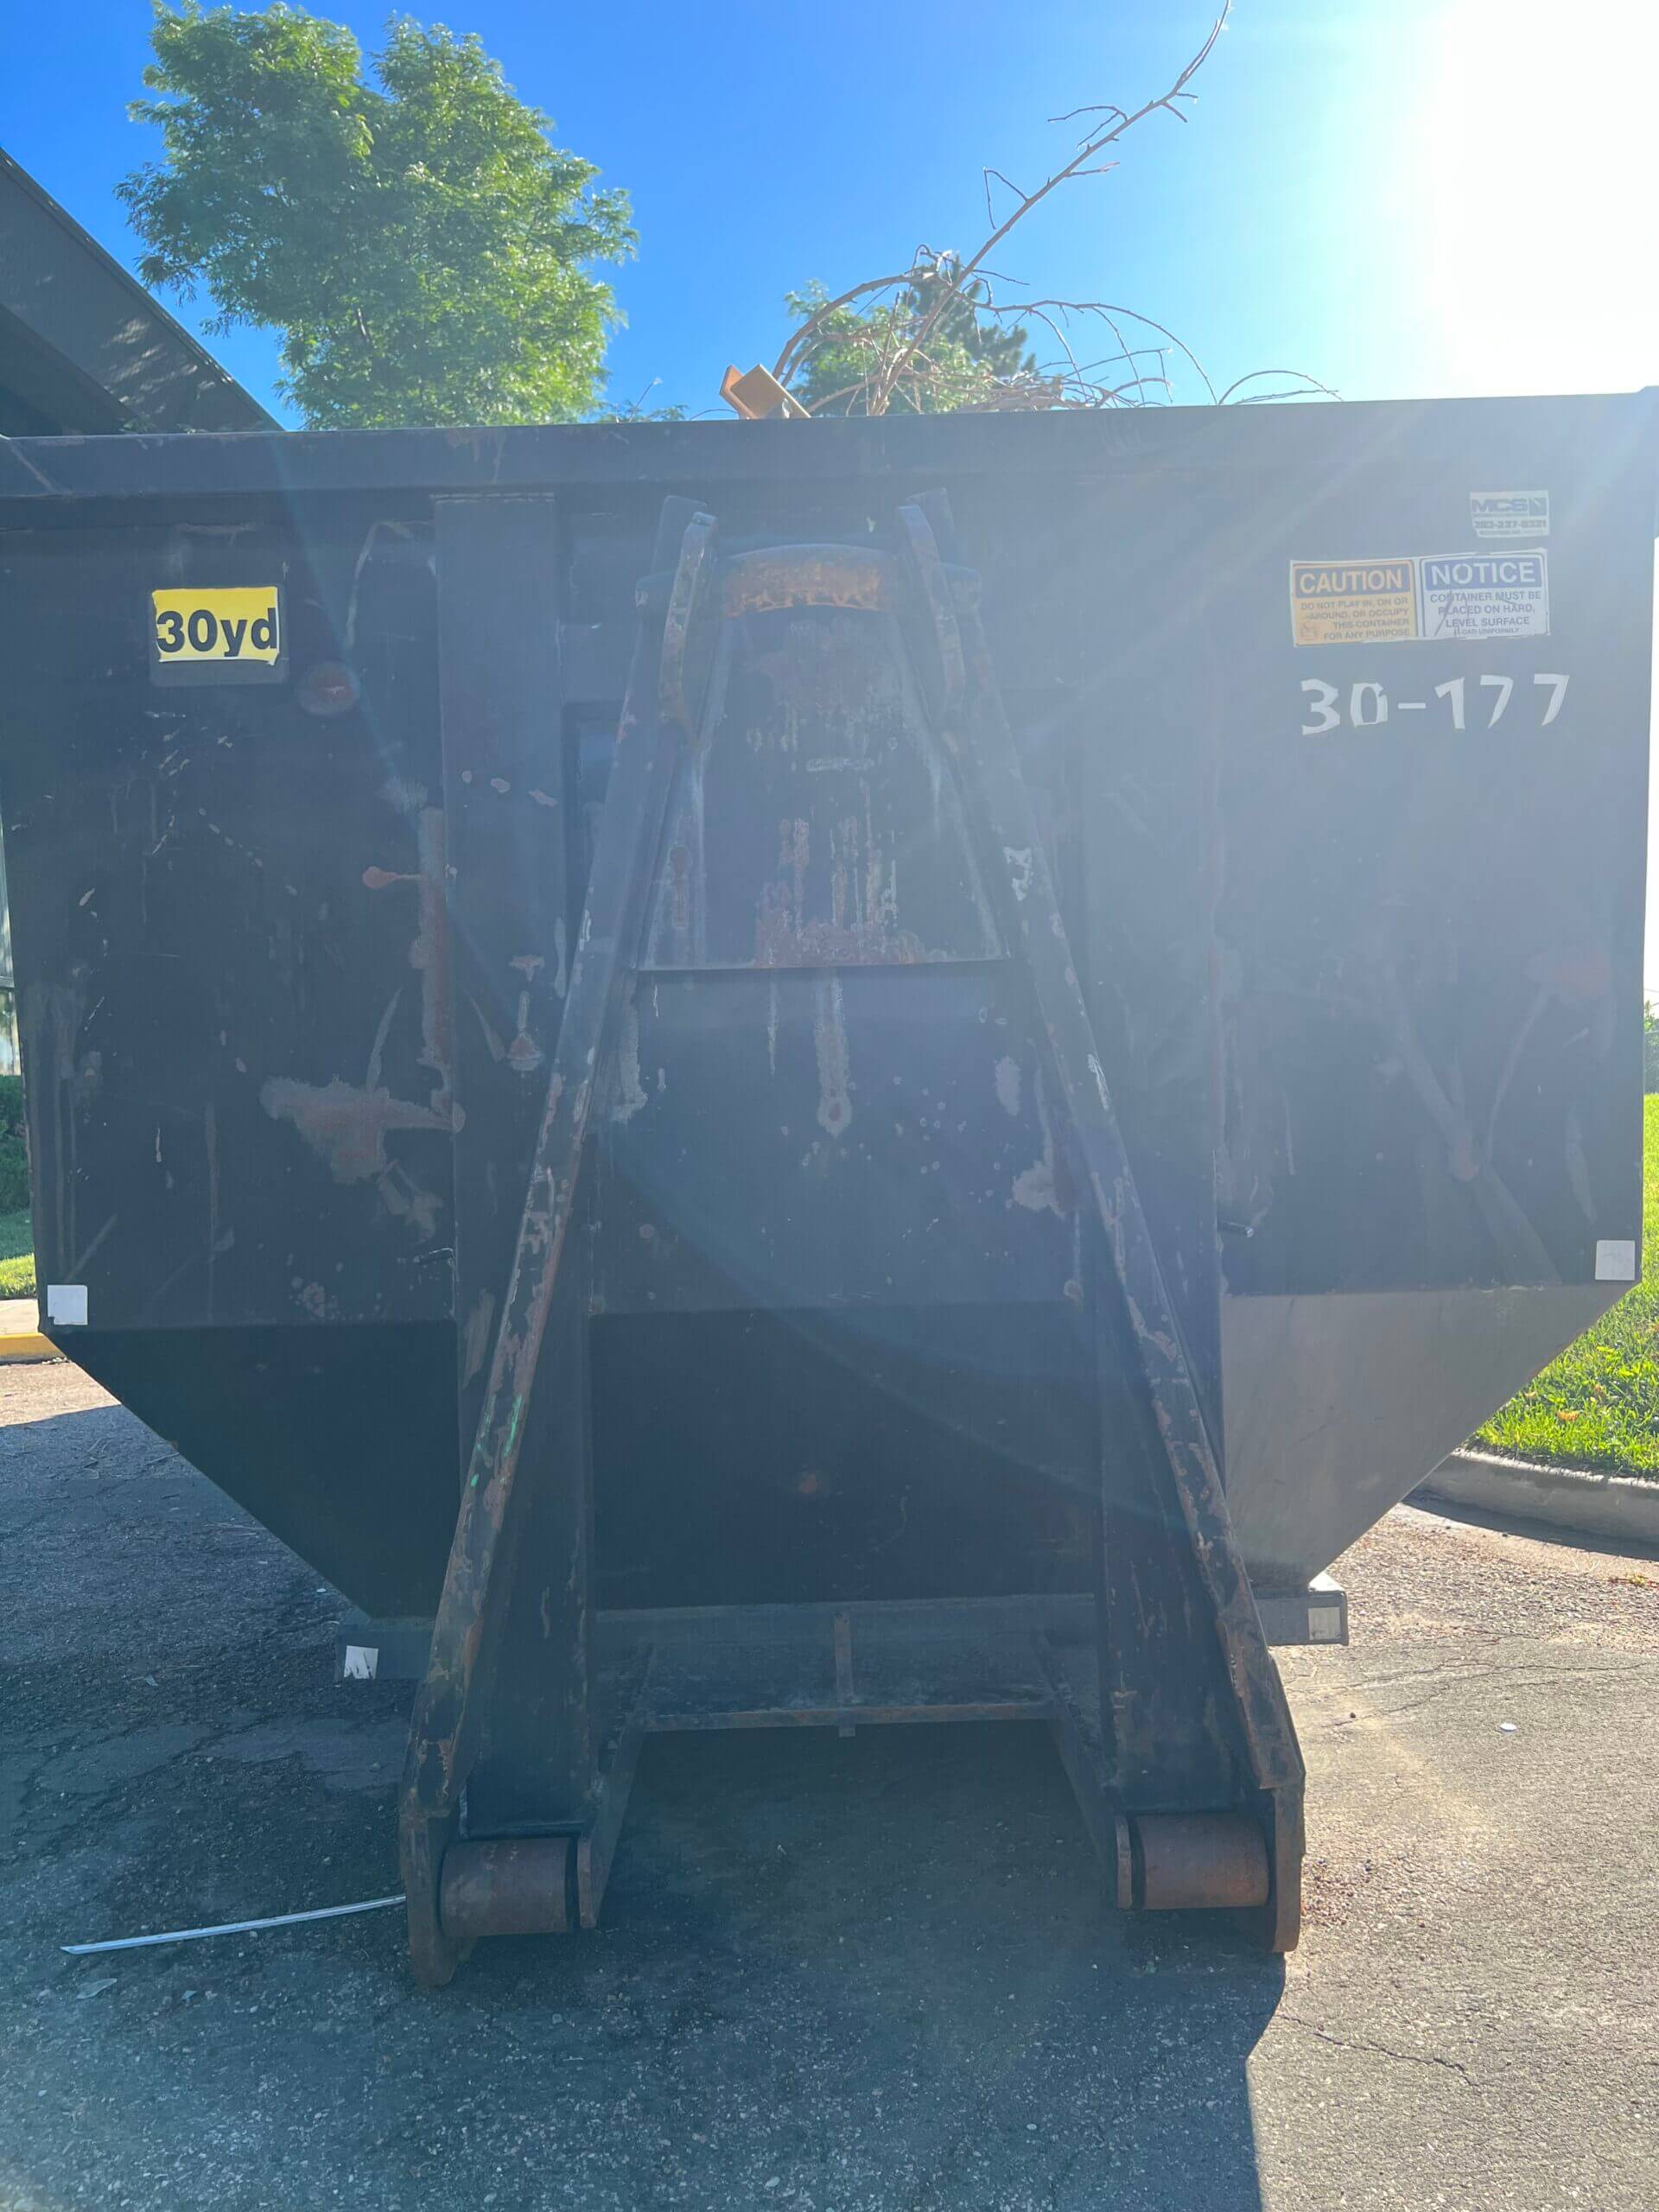 Photo of a dumpster rental in Tampa, FL